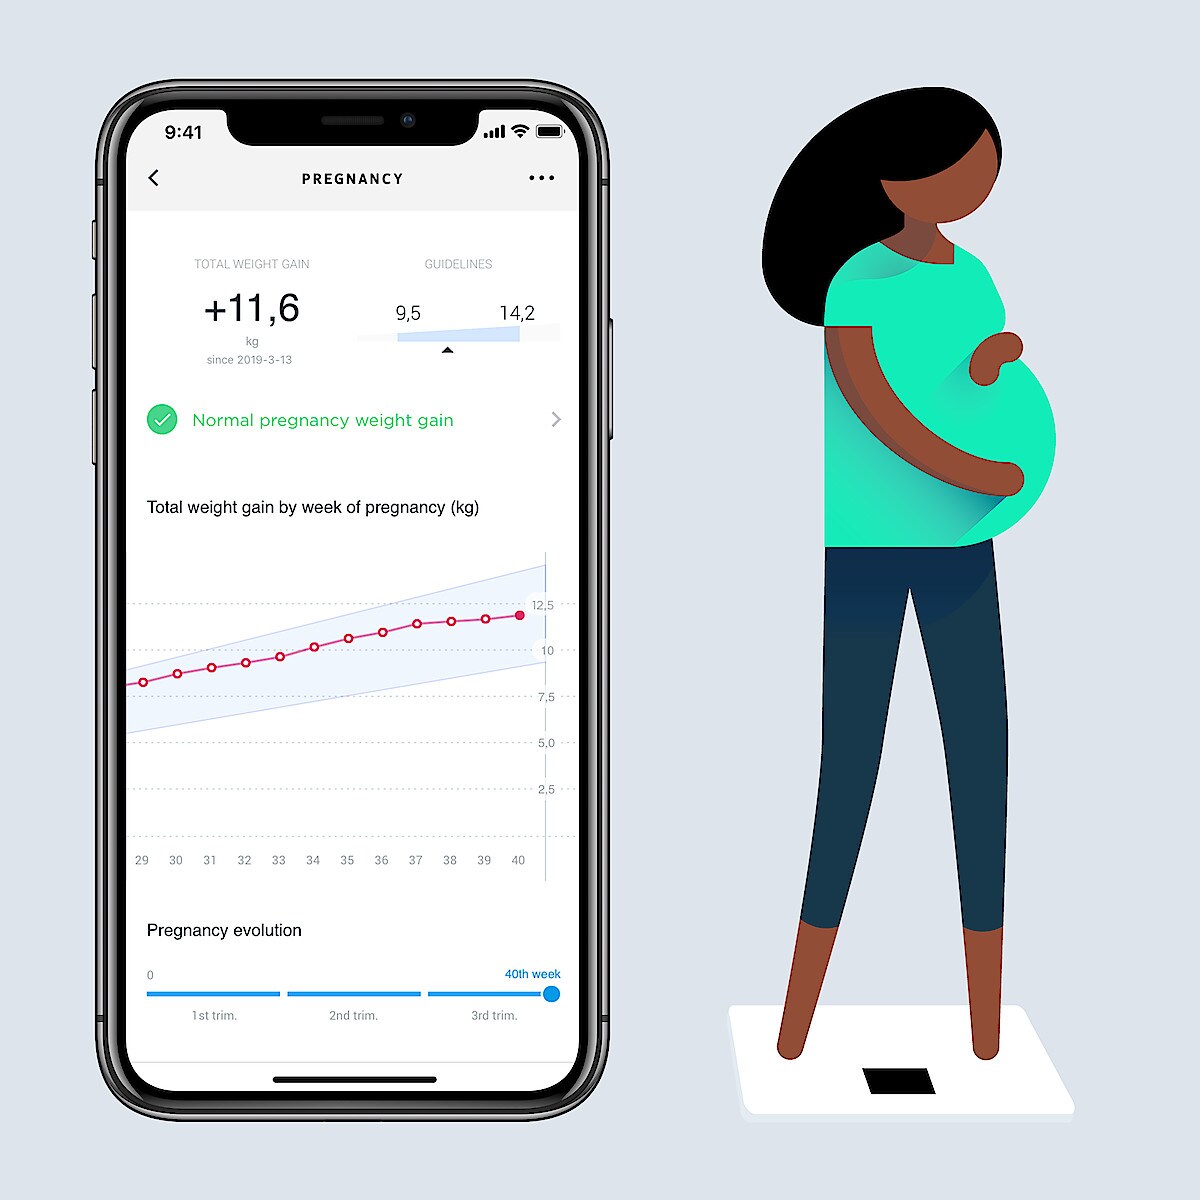 Withings Wi-Fi Body+,  personvåg

